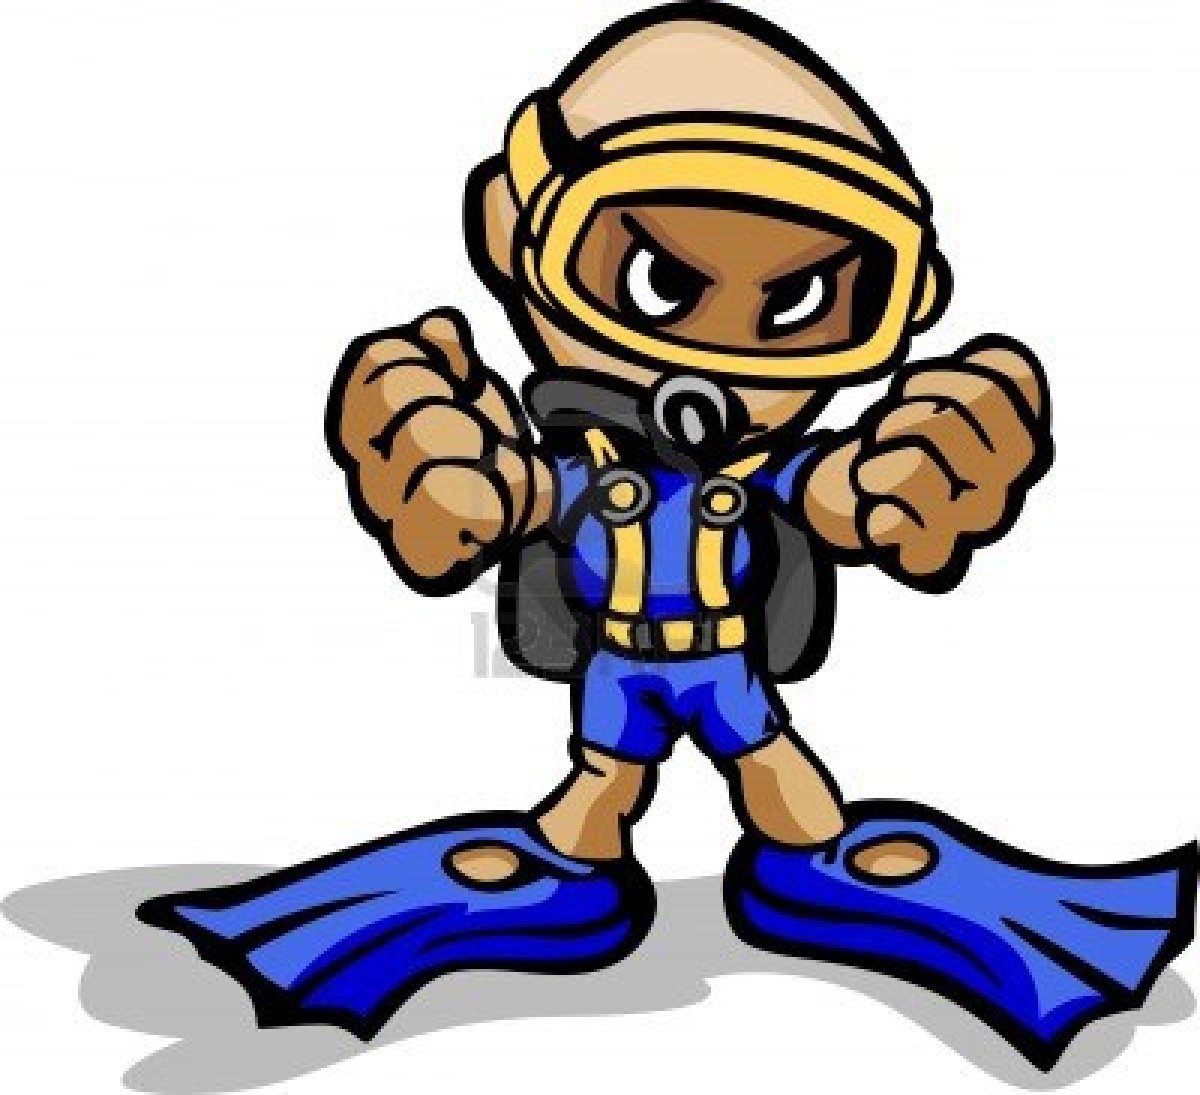 10 Cartoon Scuba Divers Free Cliparts That You Can Download To You